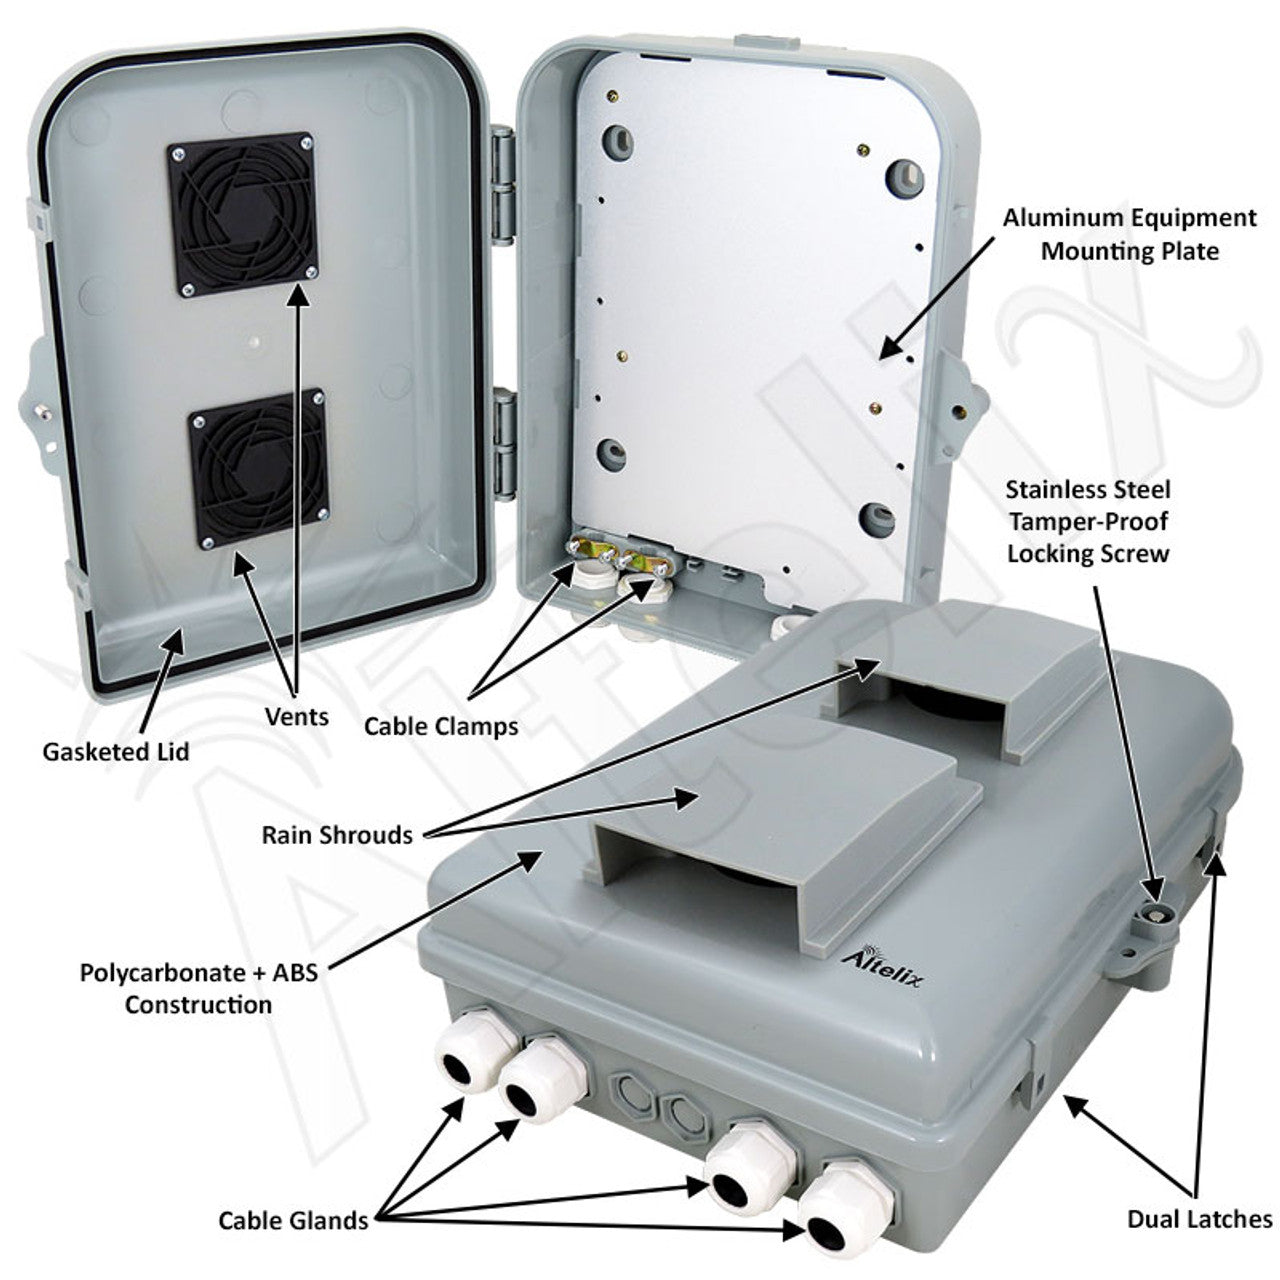 Altelix 13x10x4 PC+ABS Vented Weatherproof Utility Box NEMA Enclosure with Hinged Door and Aluminum Mounting Plate-2